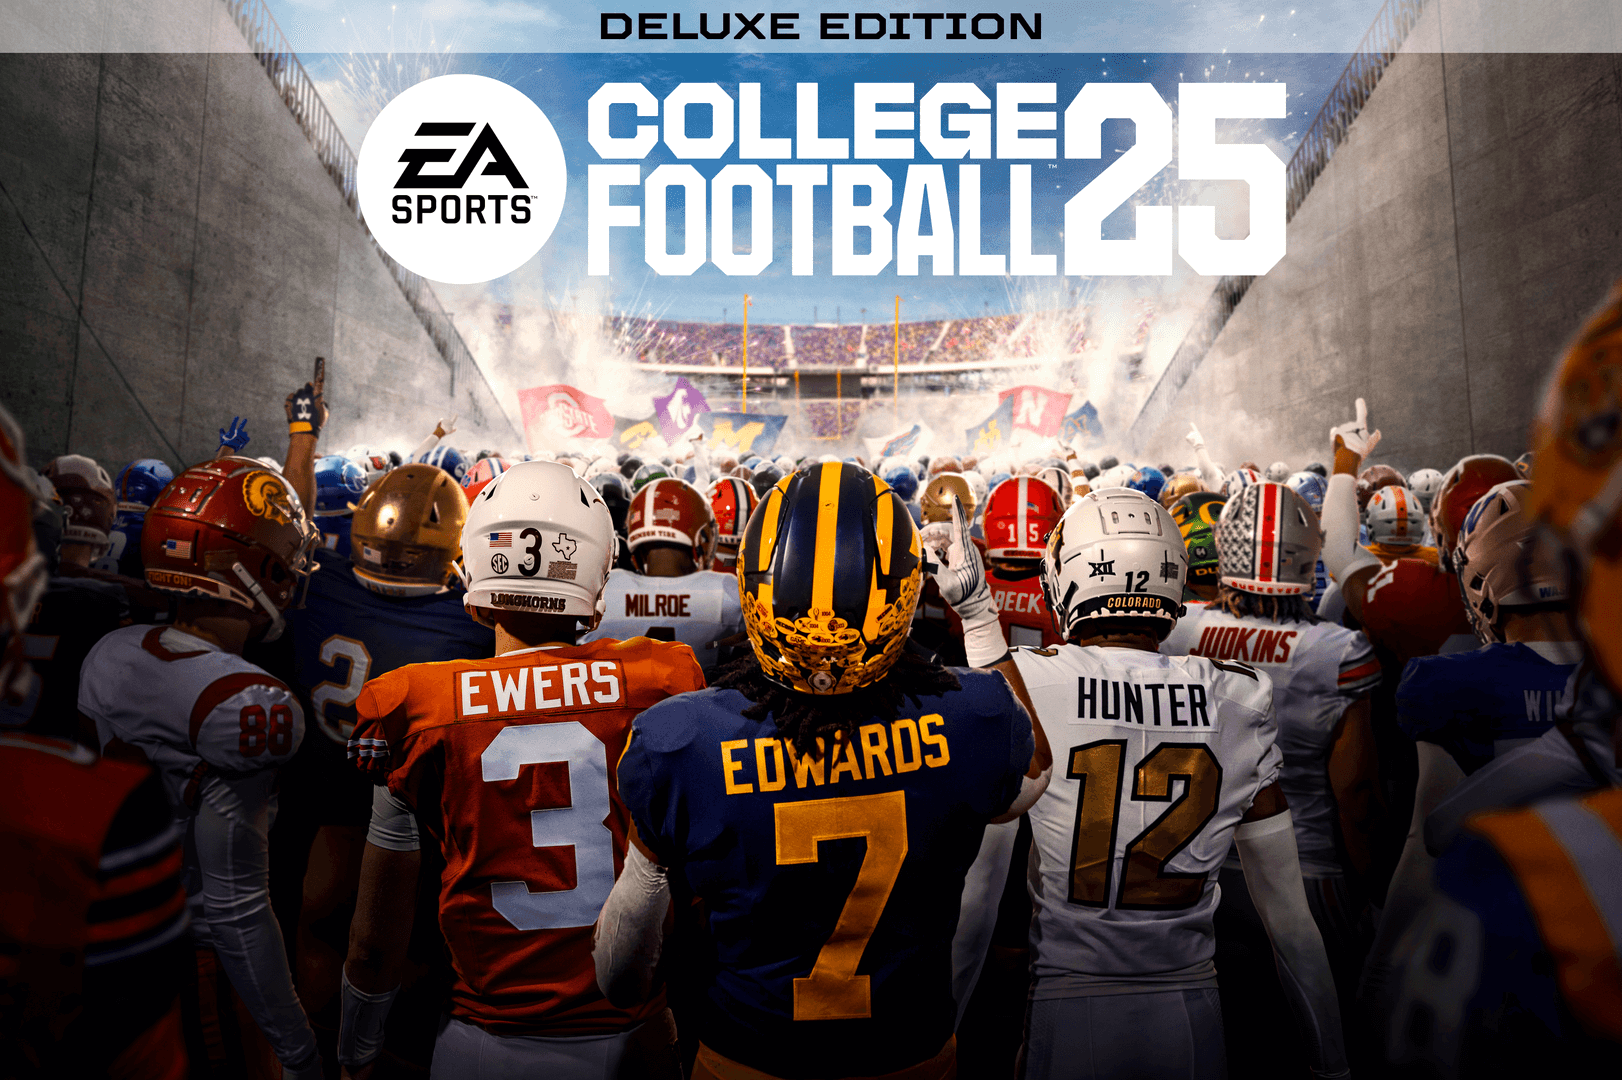 EACollegeFootball25Cover2.png